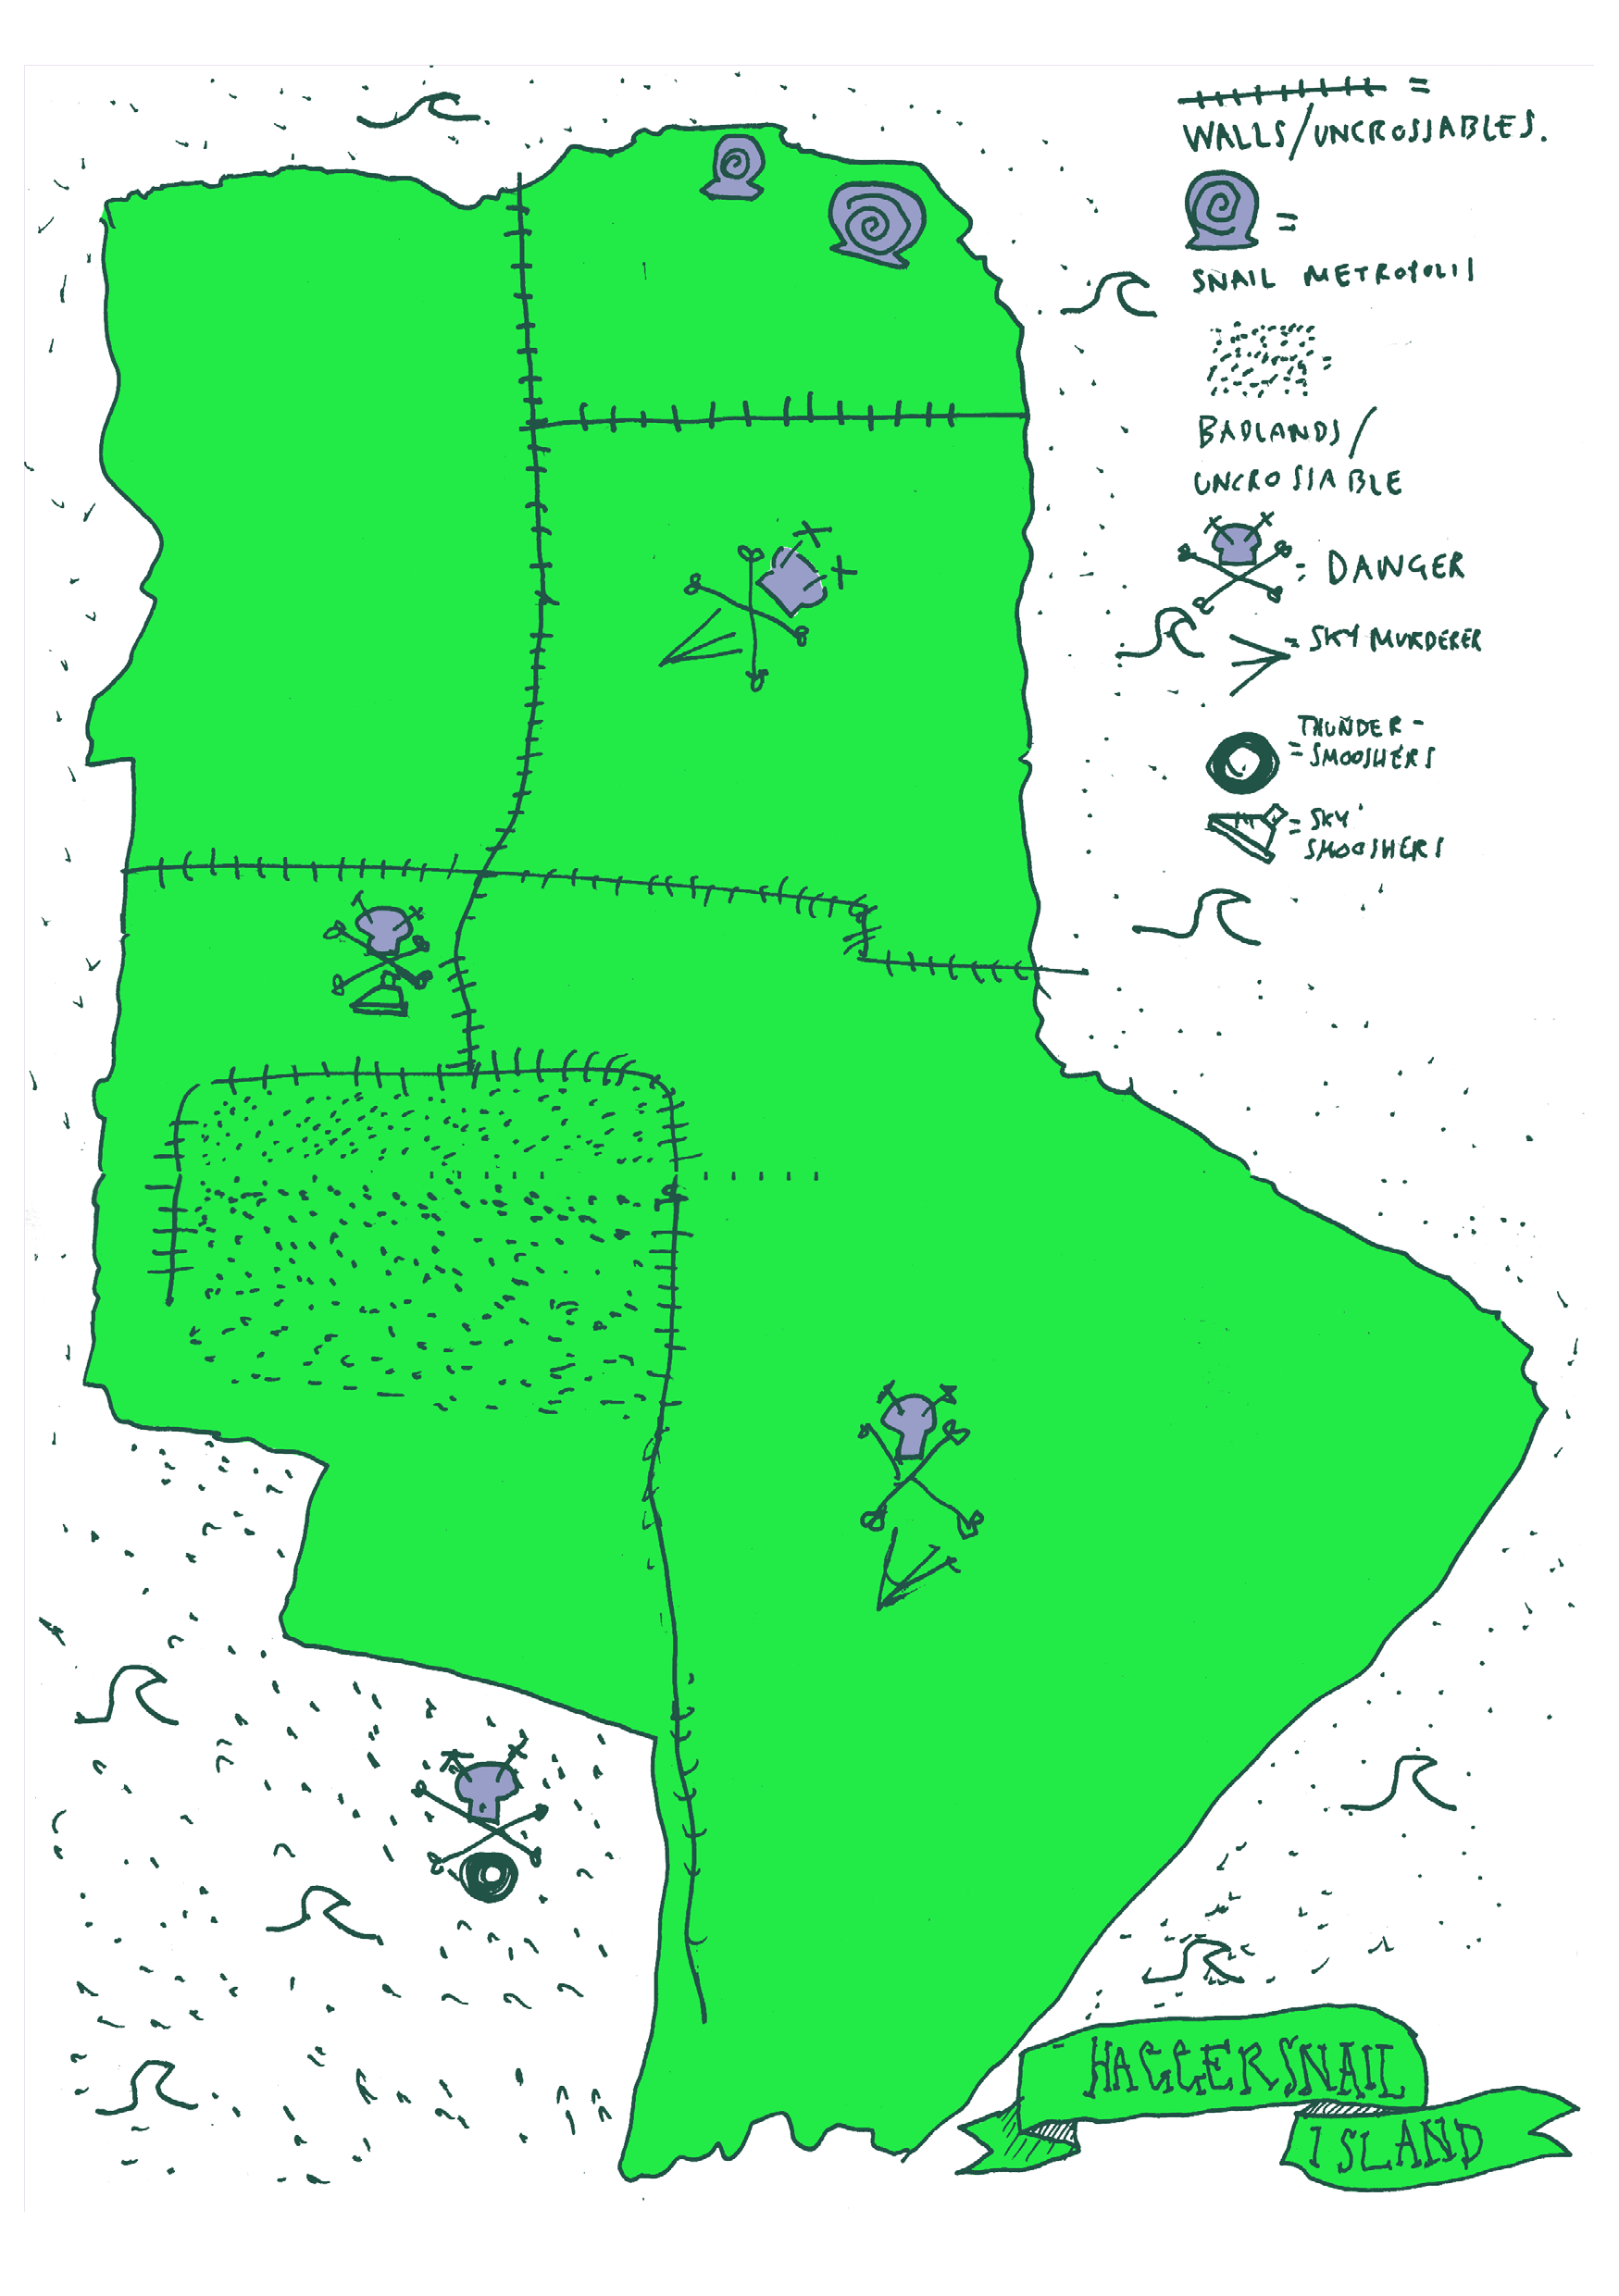 Map drawing of haggerston park, with the caption "Haggersnail Island". The map is in fluro green, and in the middle are areas marked out with purple skull and cross-bones.  A legend on the side indicates areas of "walls/uncrossables; snail metropolis; badlands/uncrossable; danger; sky smooshers;